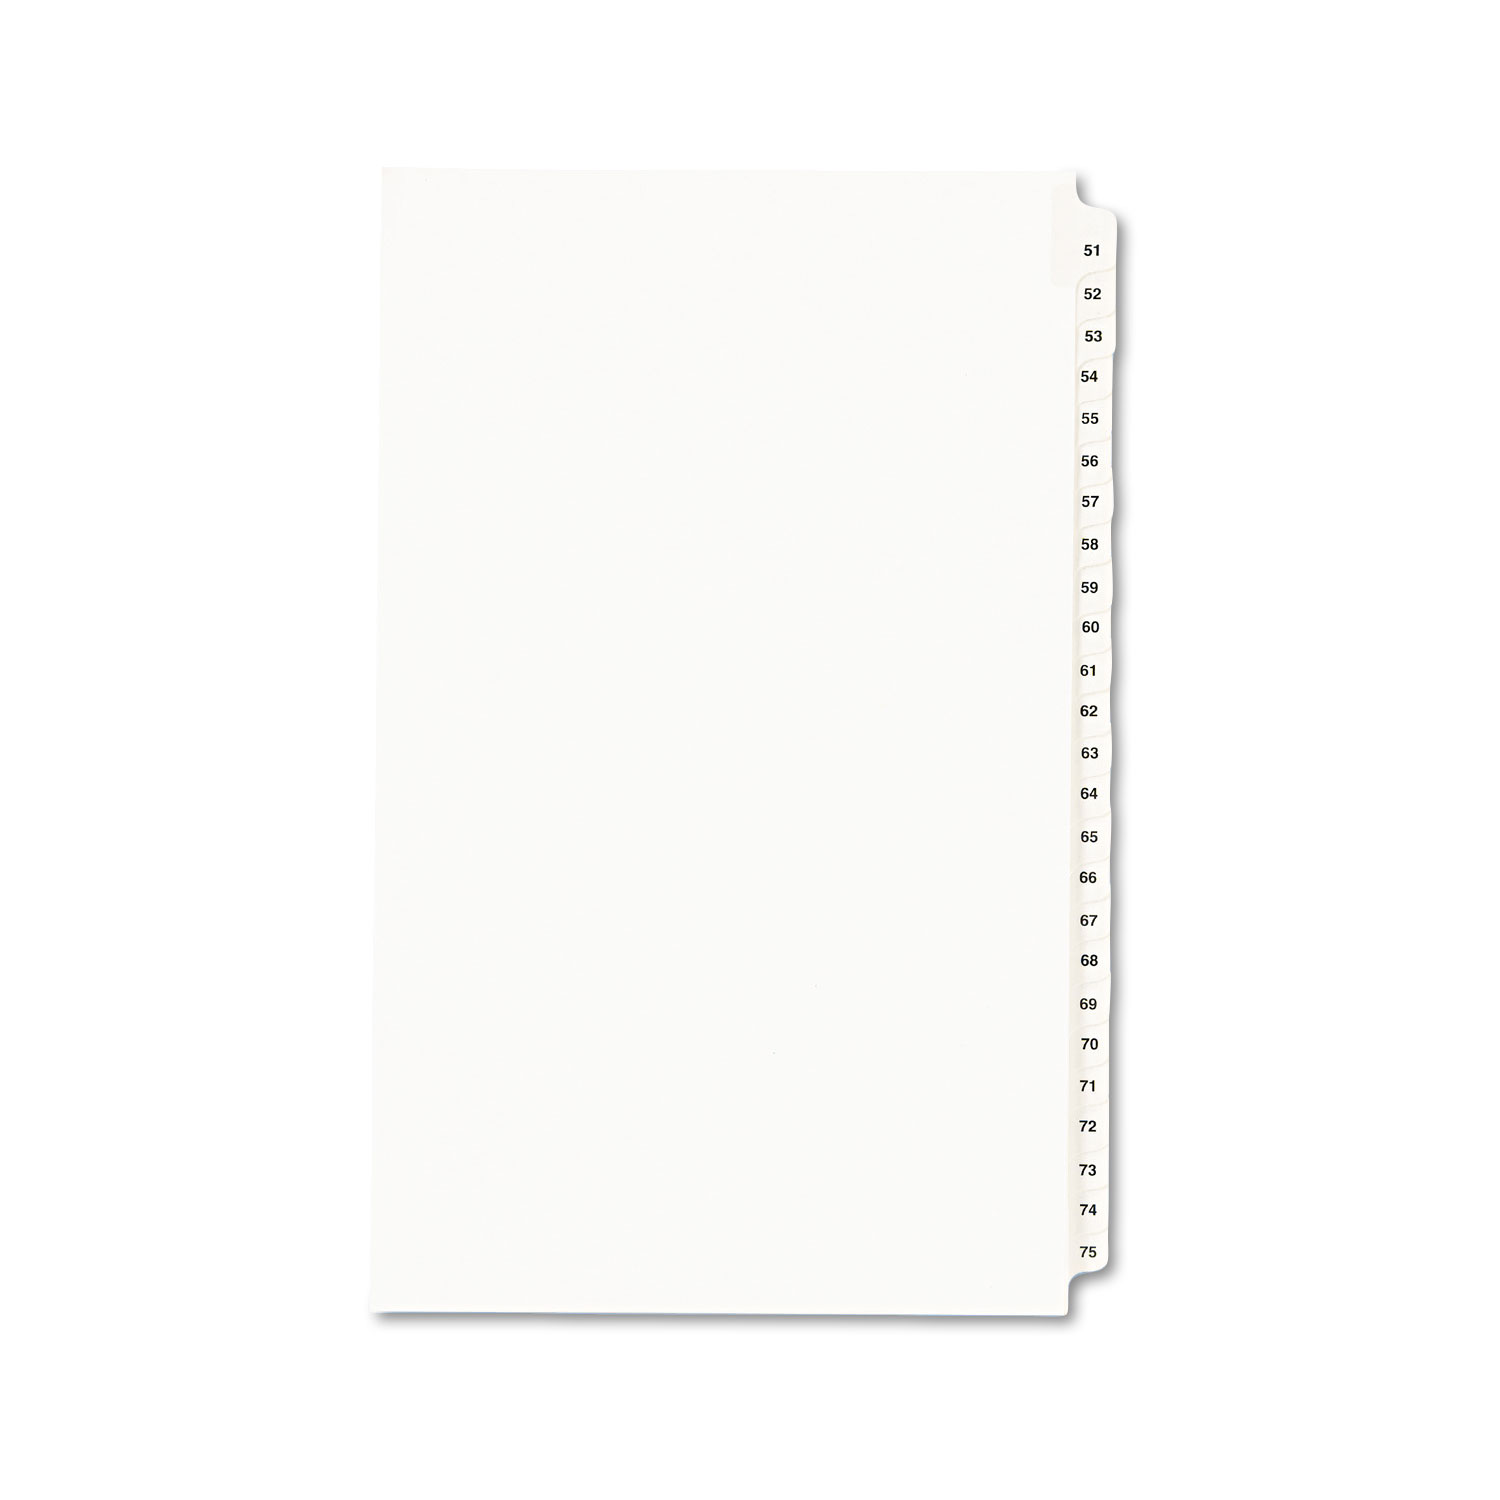  Avery 01432 Preprinted Legal Exhibit Side Tab Index Dividers, Avery Style, 25-Tab, 51 to 75, 14 x 8.5, White, 1 Set (AVE01432) 